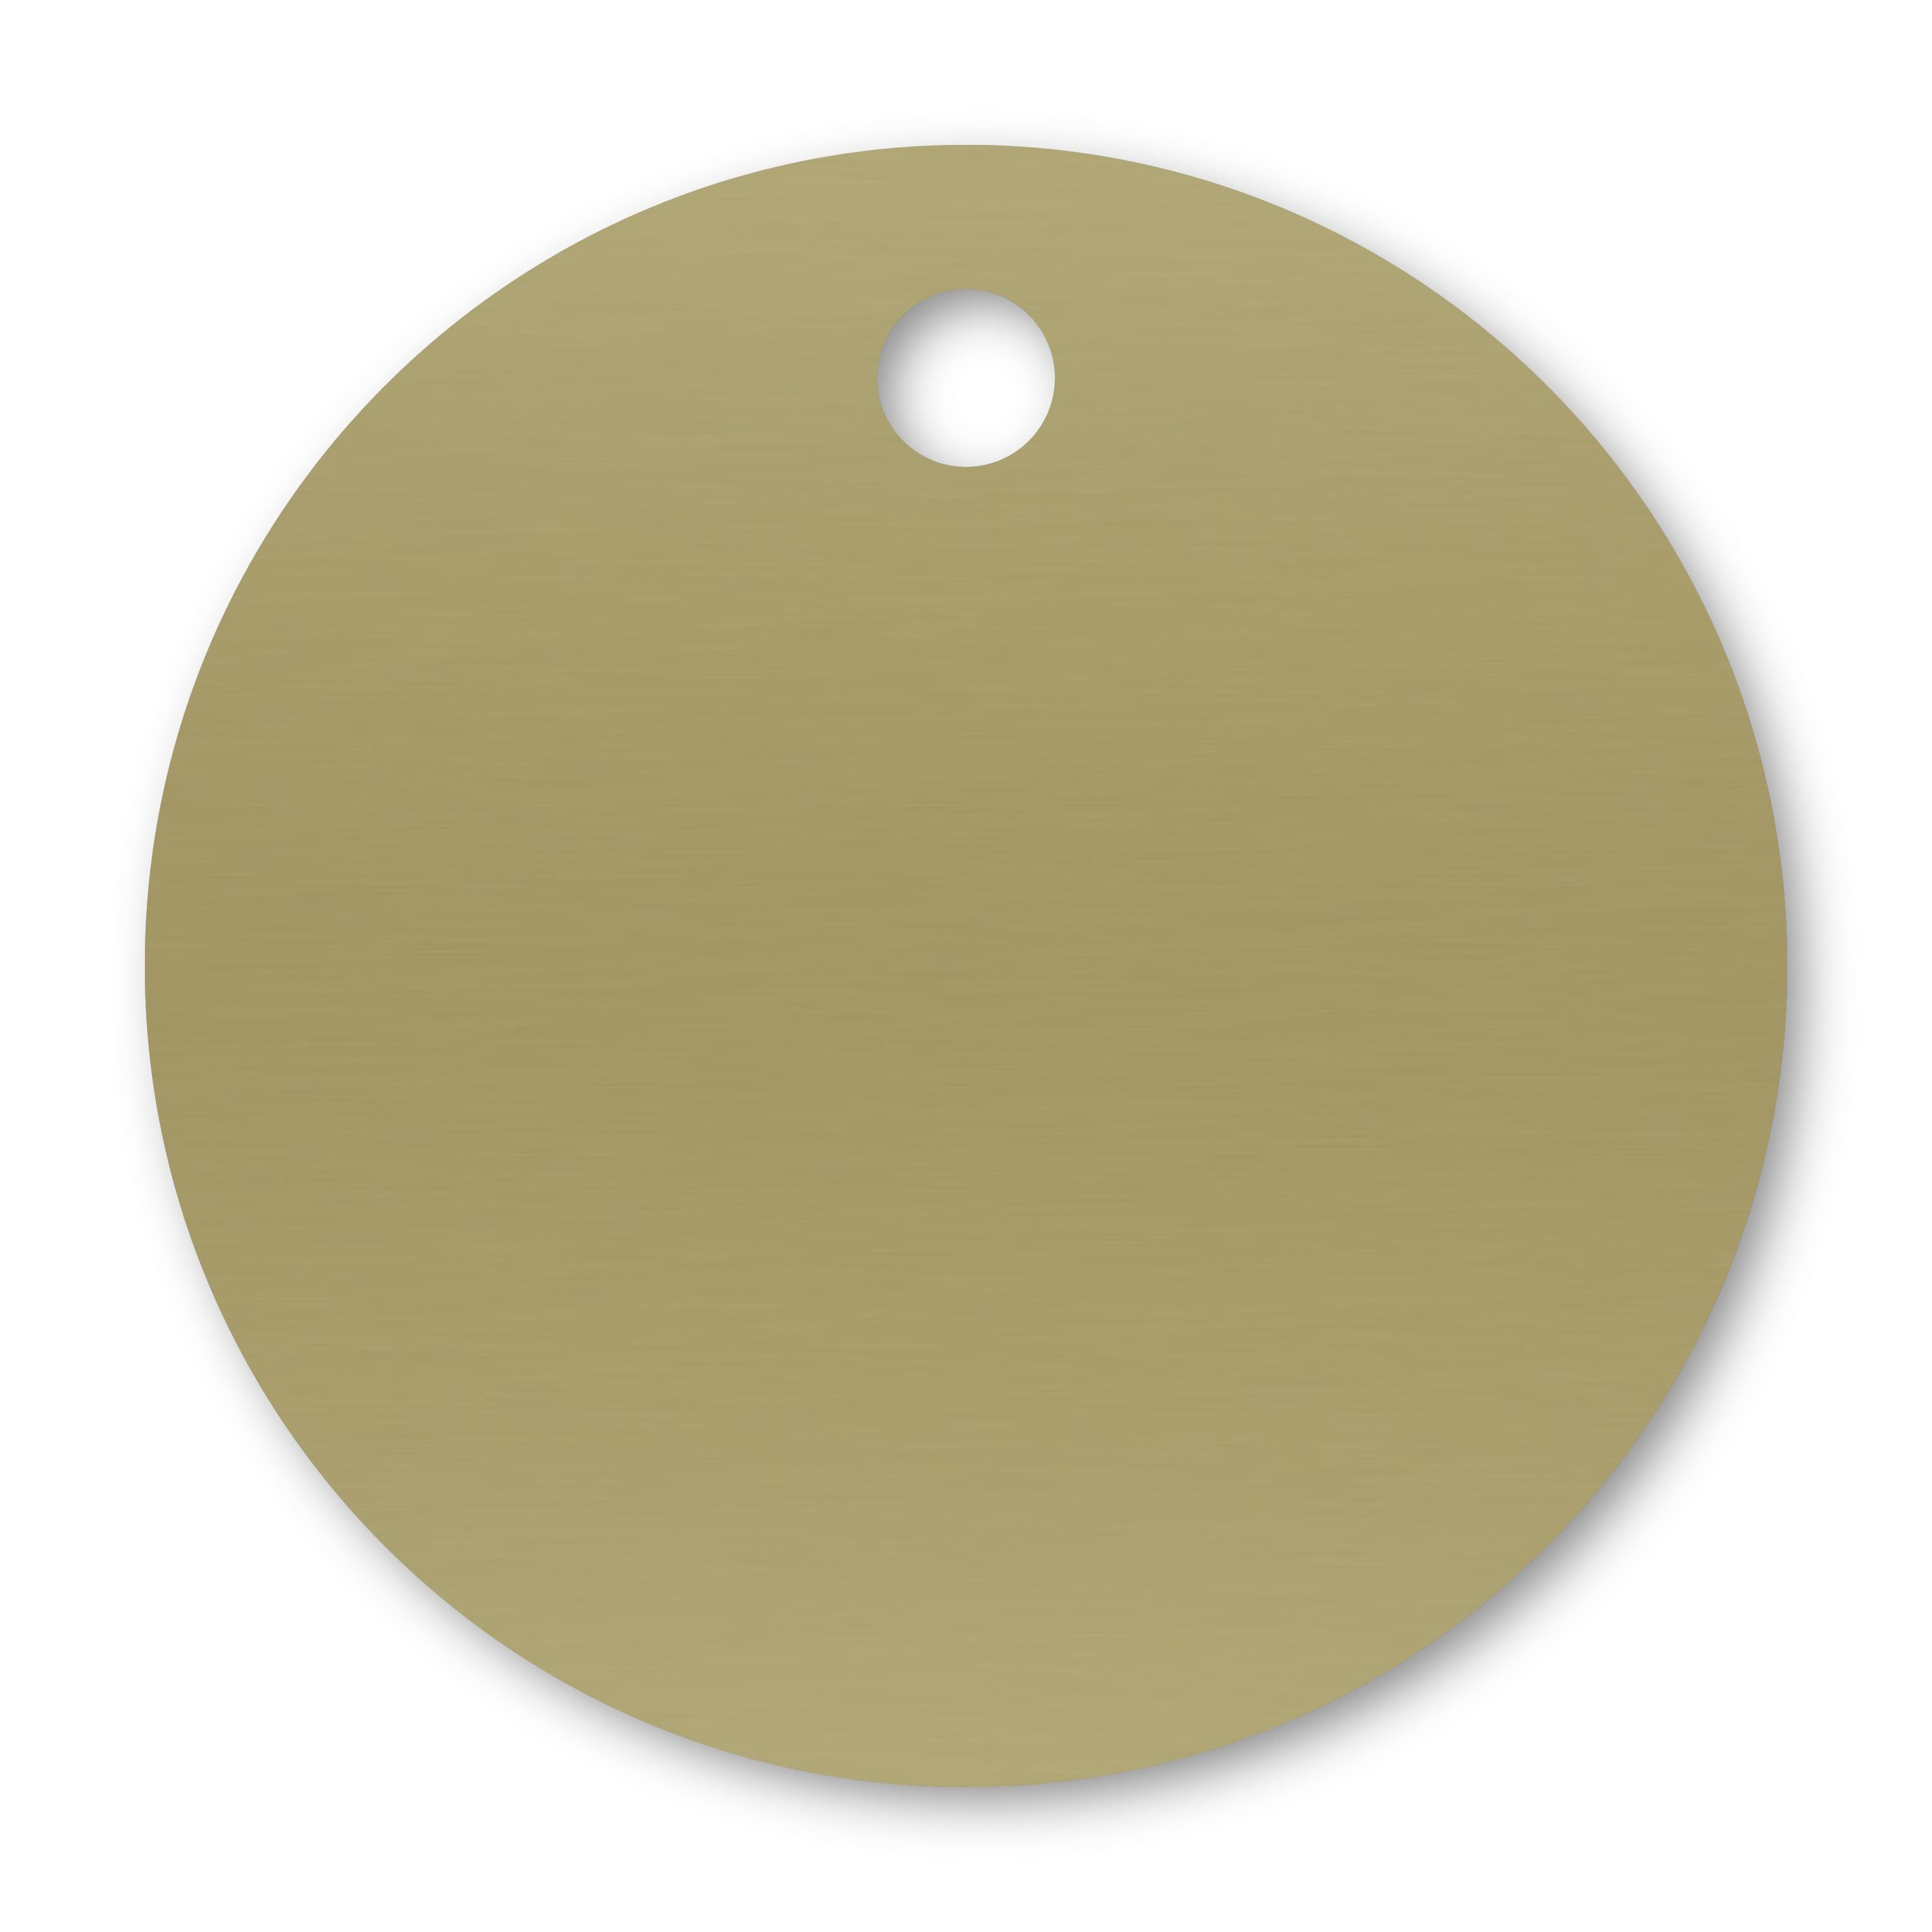 Anodized Aluminum Round Tags, 1-1/4" with 1/8" Hole, Laser Engraved Metal Tags Craftworks NW Gold 